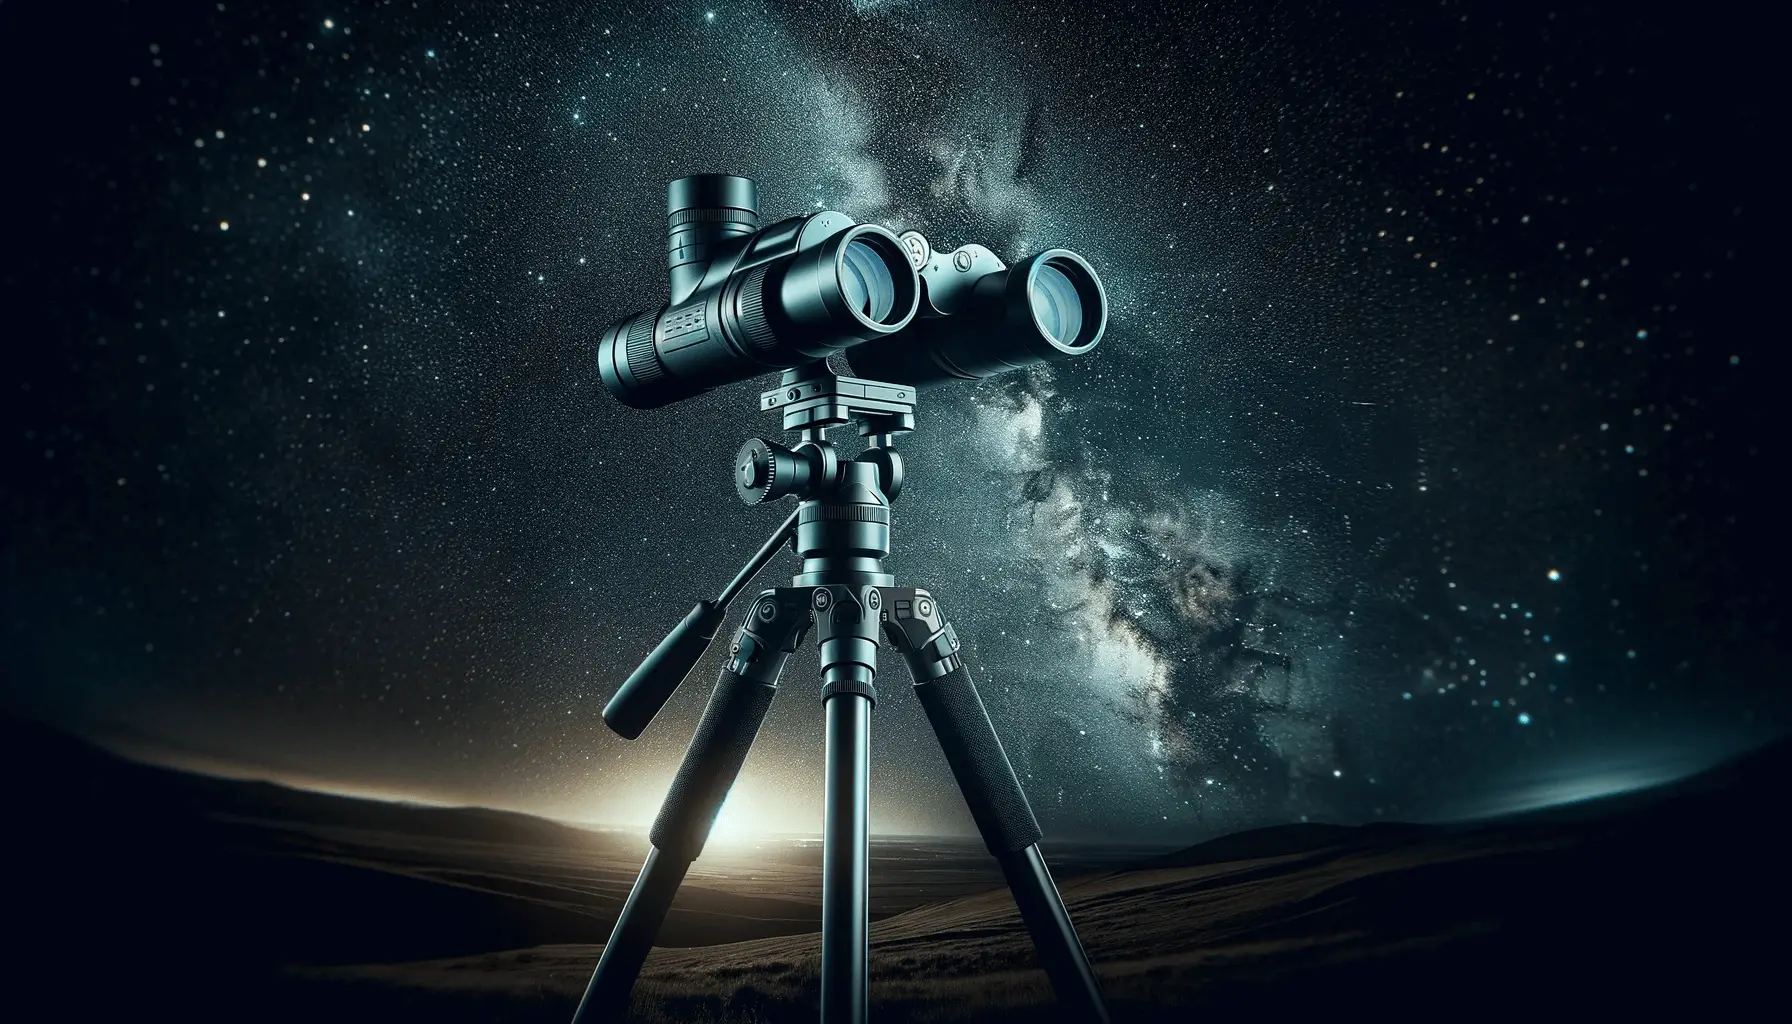 Image of astronomy binoculars with a tripod.